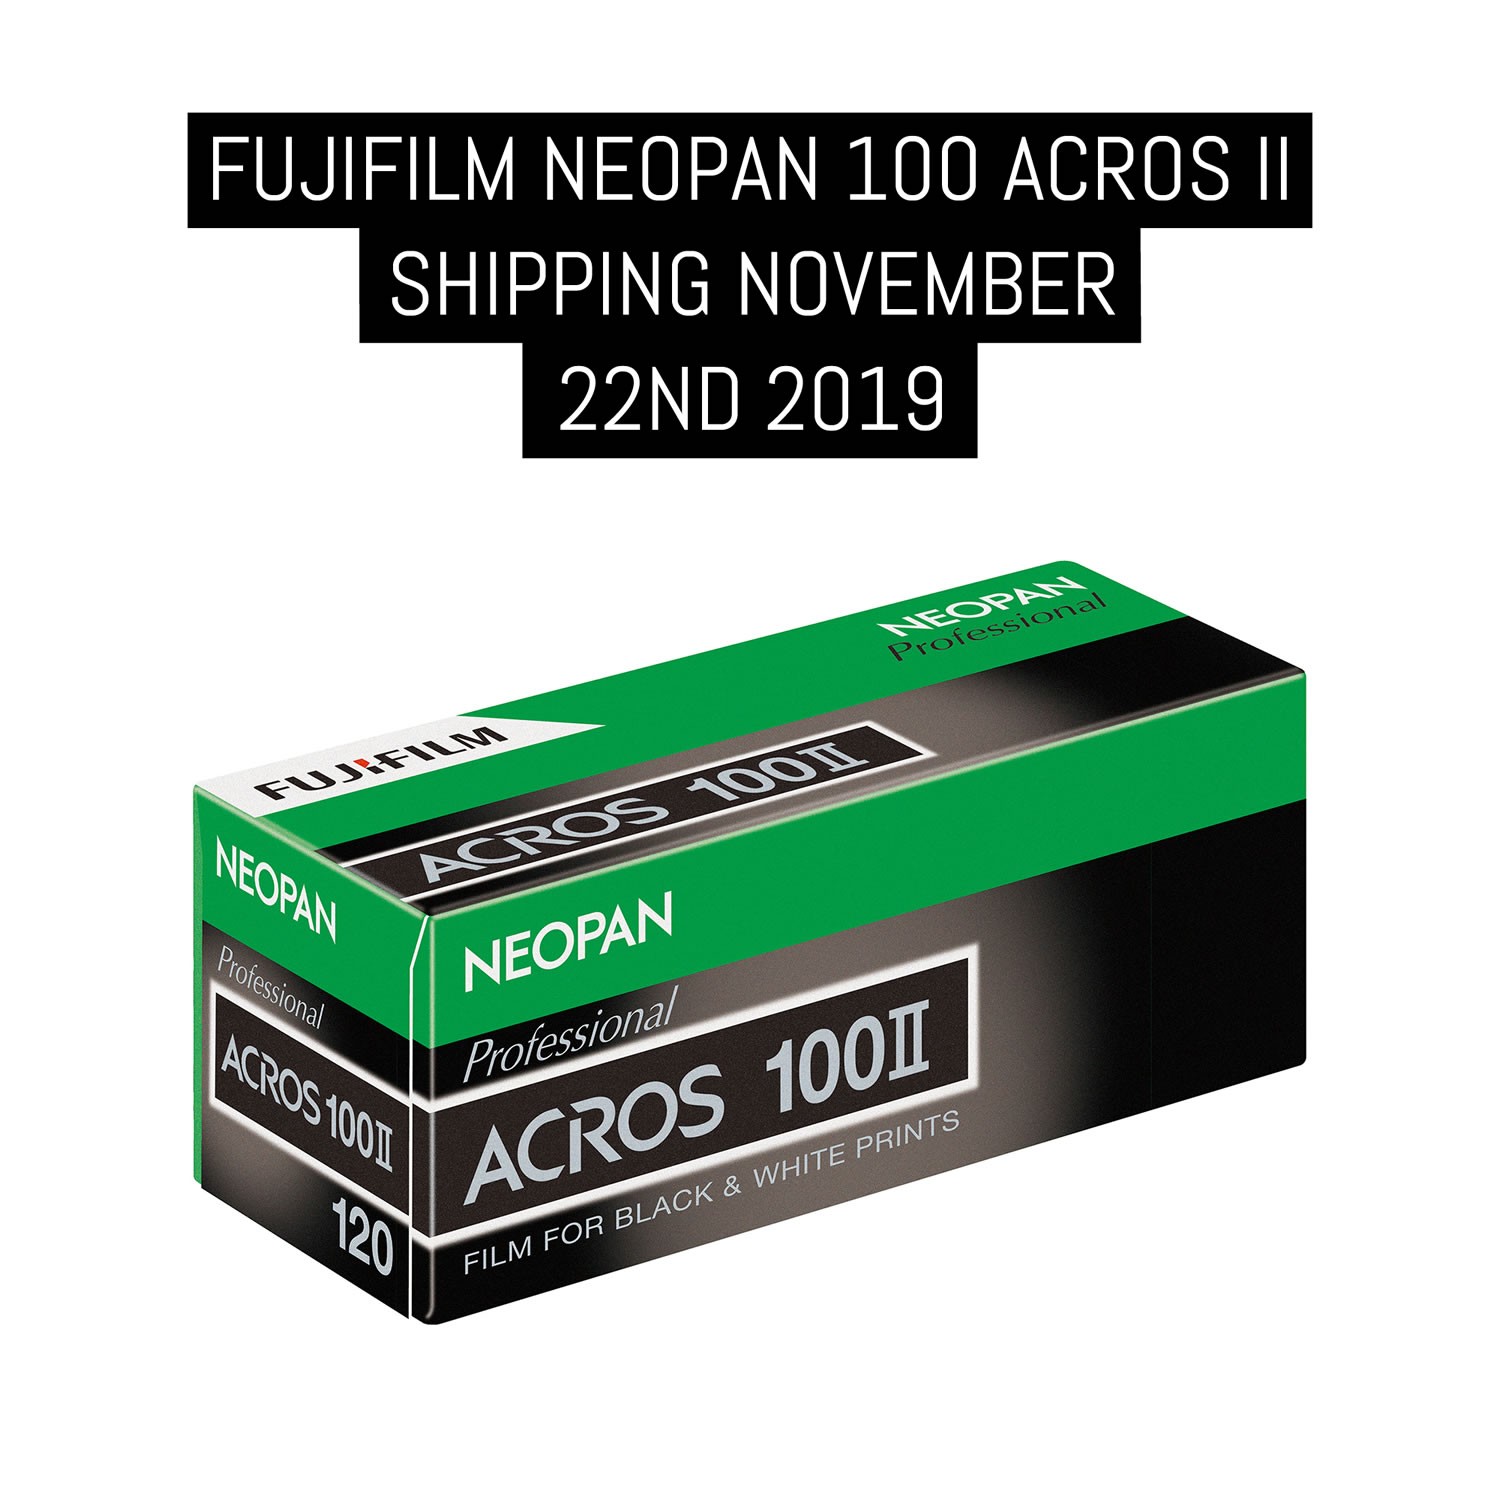 UPDATE: Fujifilm NEOPAN 100 ACROS II shipping November 22nd in 35mm and 120 formats